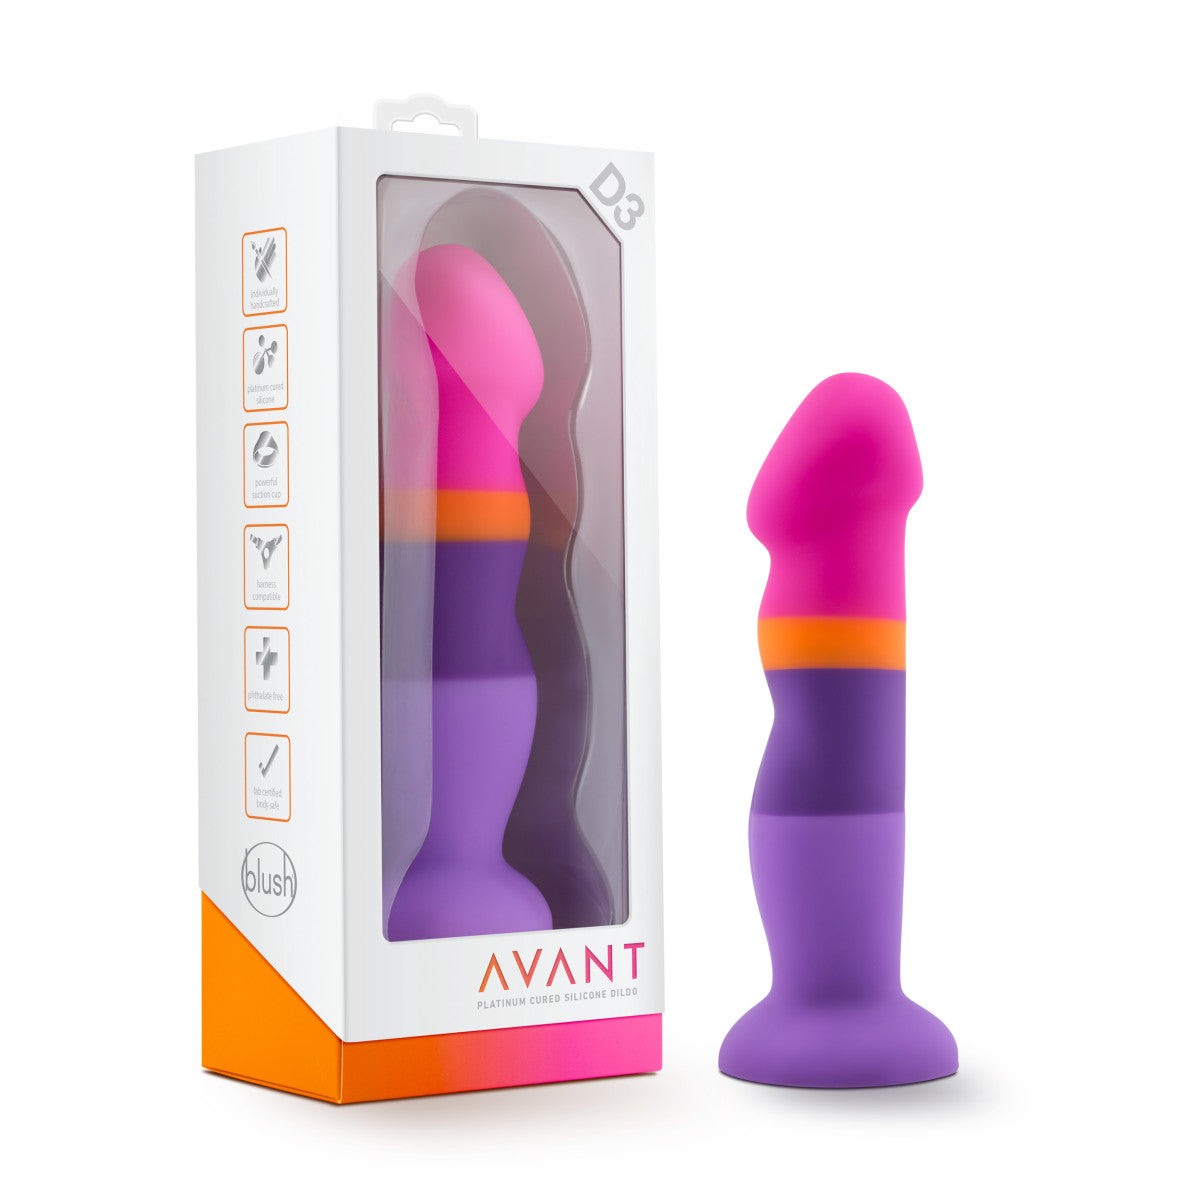 Blush Avant | Summer Fling D3: Artisan 8 Inch Curved G-Spot Dildo with Suction Cup Base